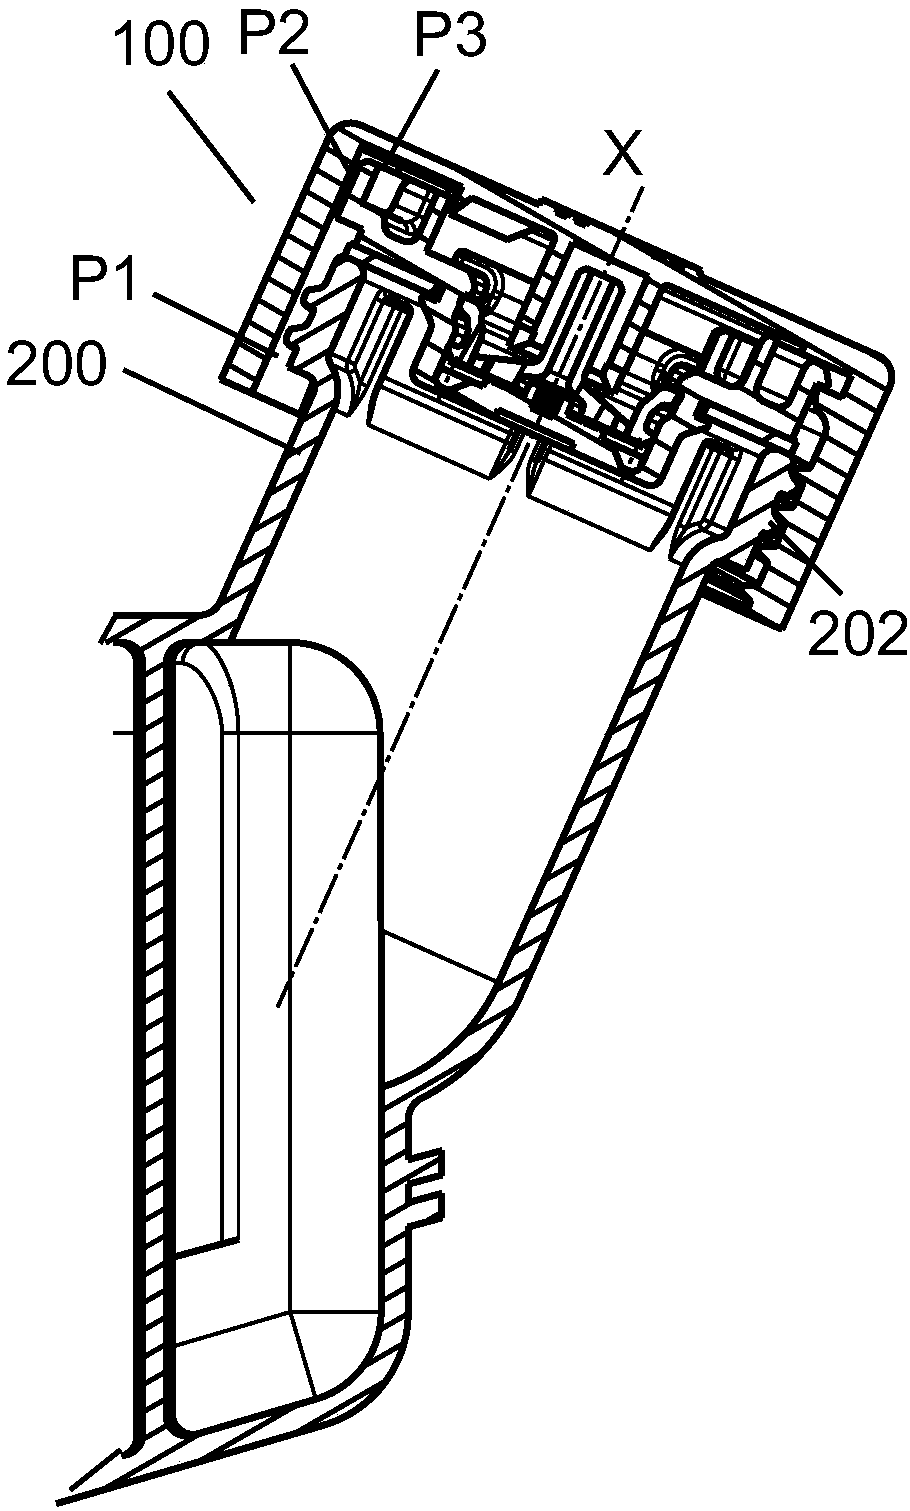 Cover assembly and liquid storing device comprising cover assembly